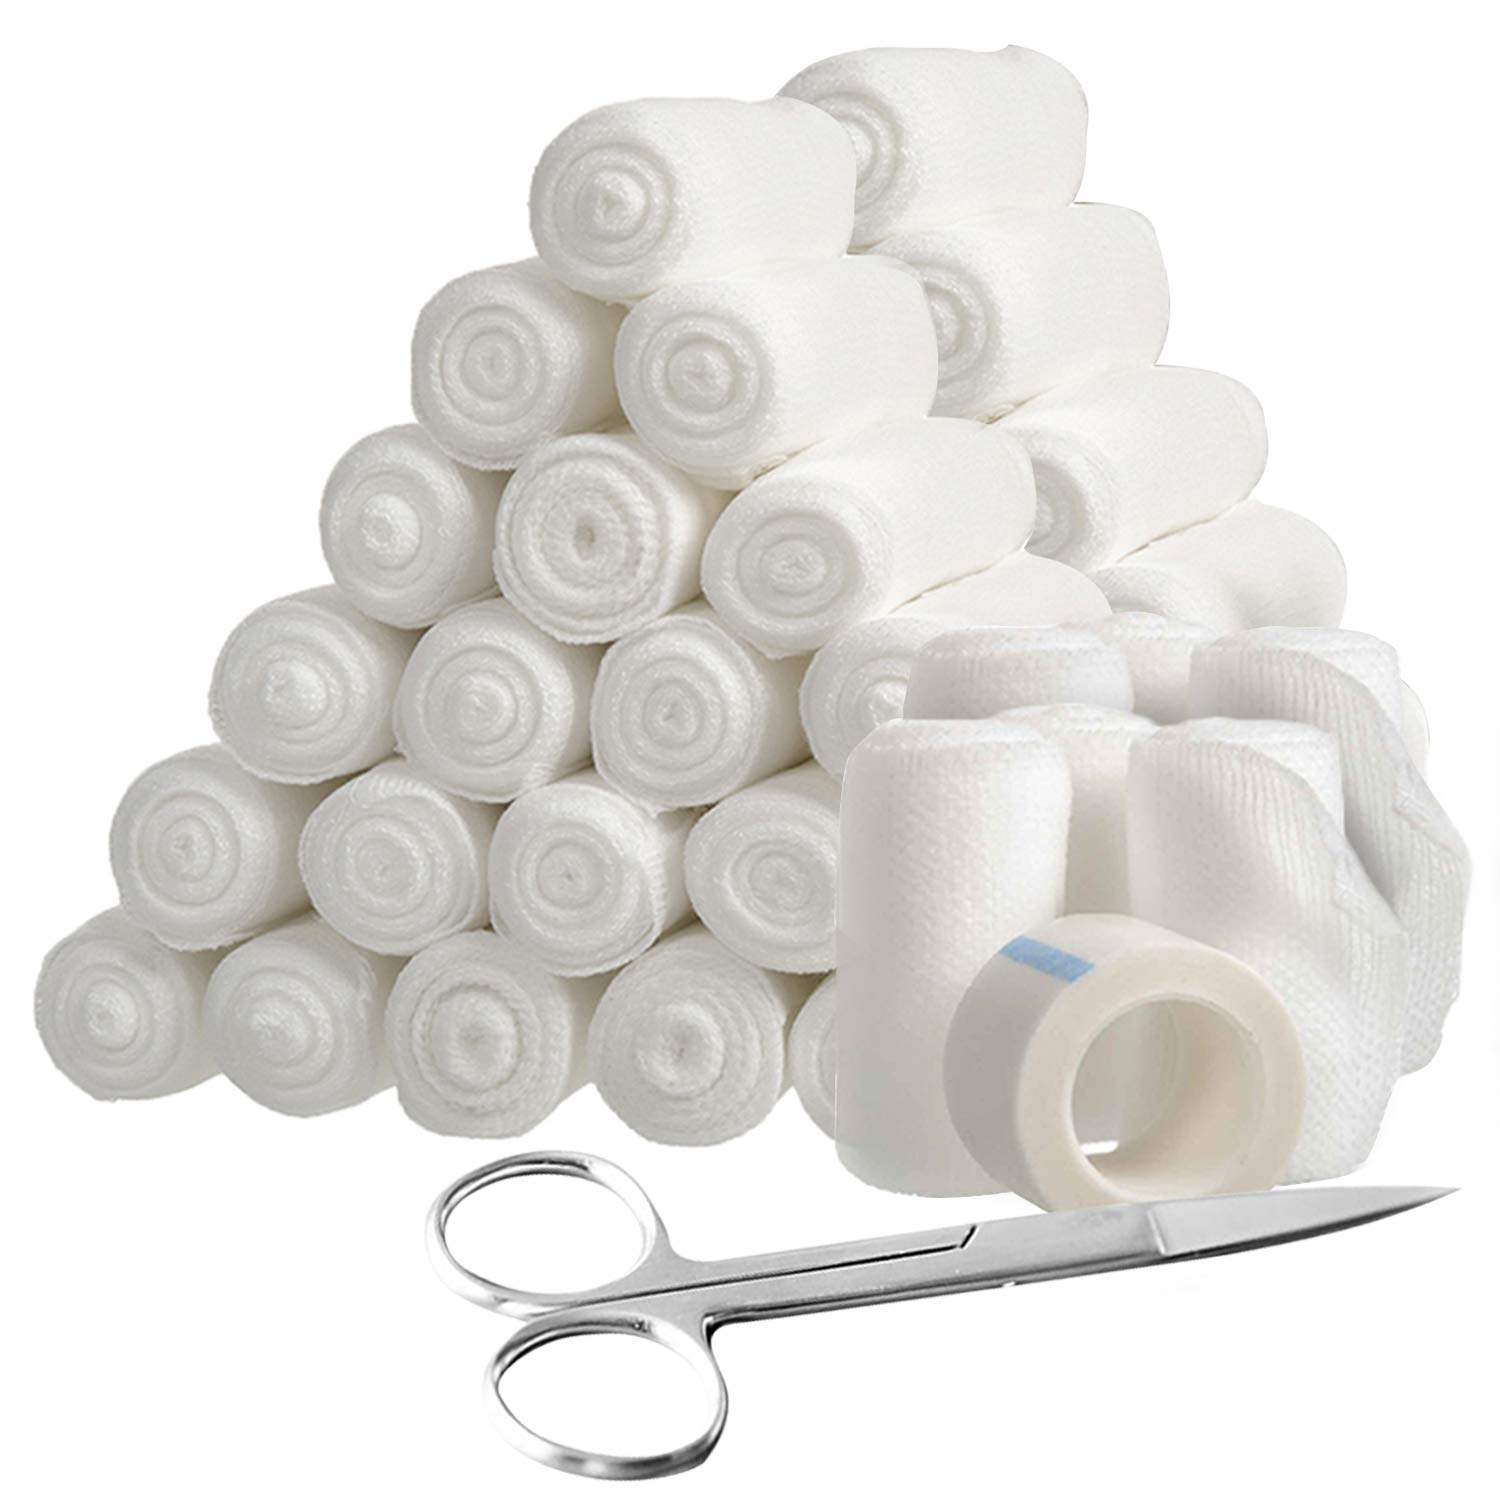 ''48-Piece Stretch Bandage Roll with TAPE and Scissors Bundle Pack - 4 Yards Sterile Rolled Gauze Ban